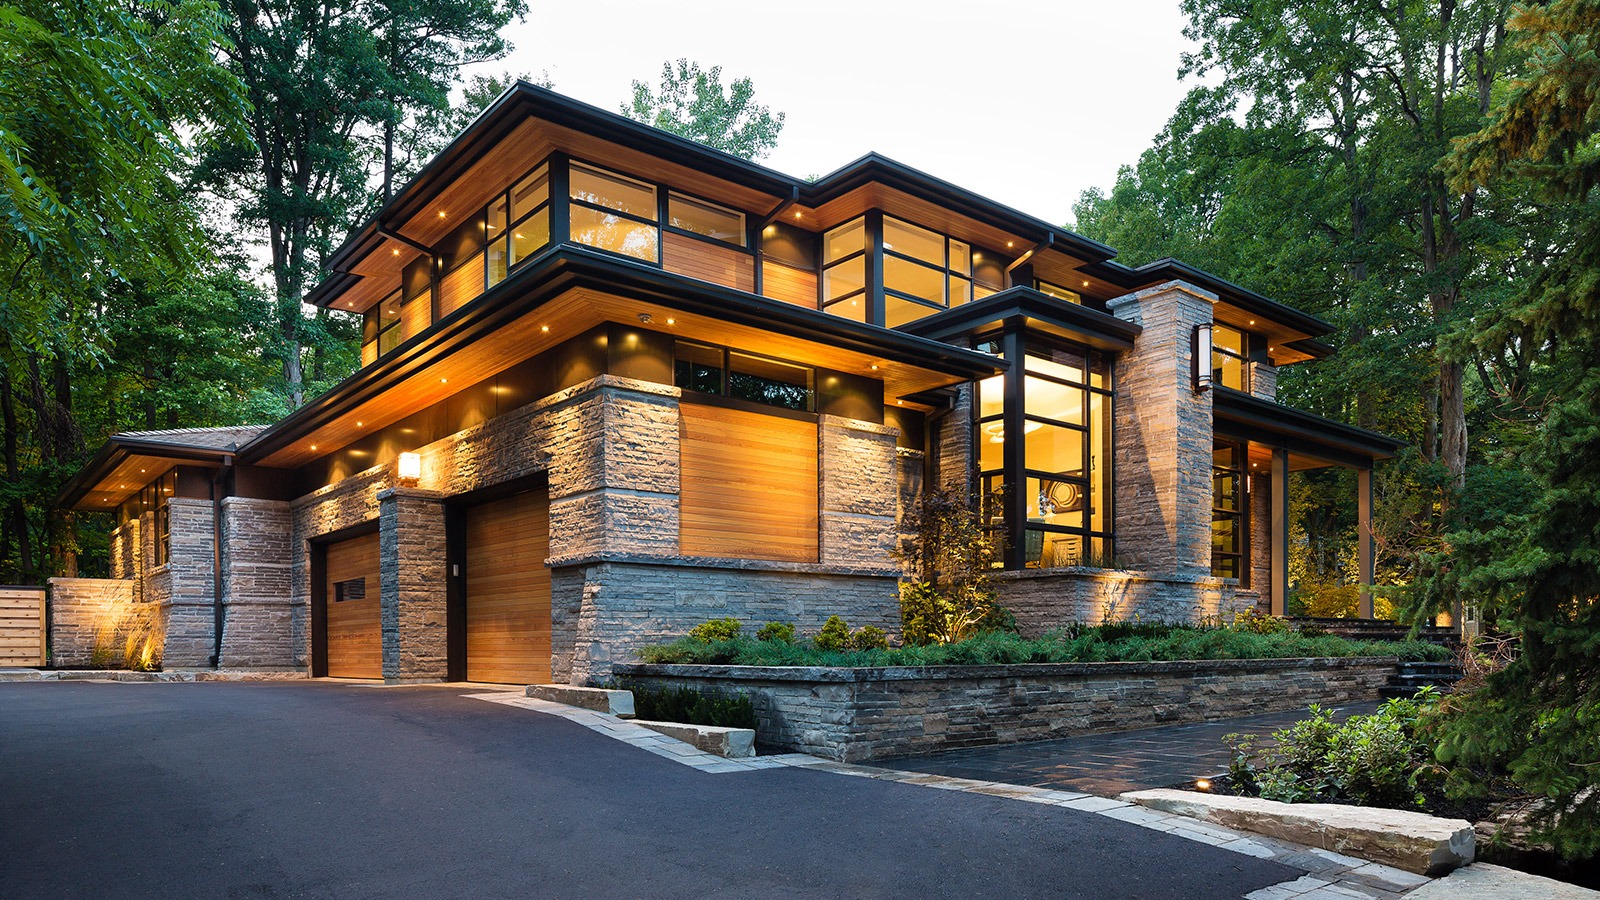 Mississauga modern home with natural stone, metal cladding and flagstone walkway.